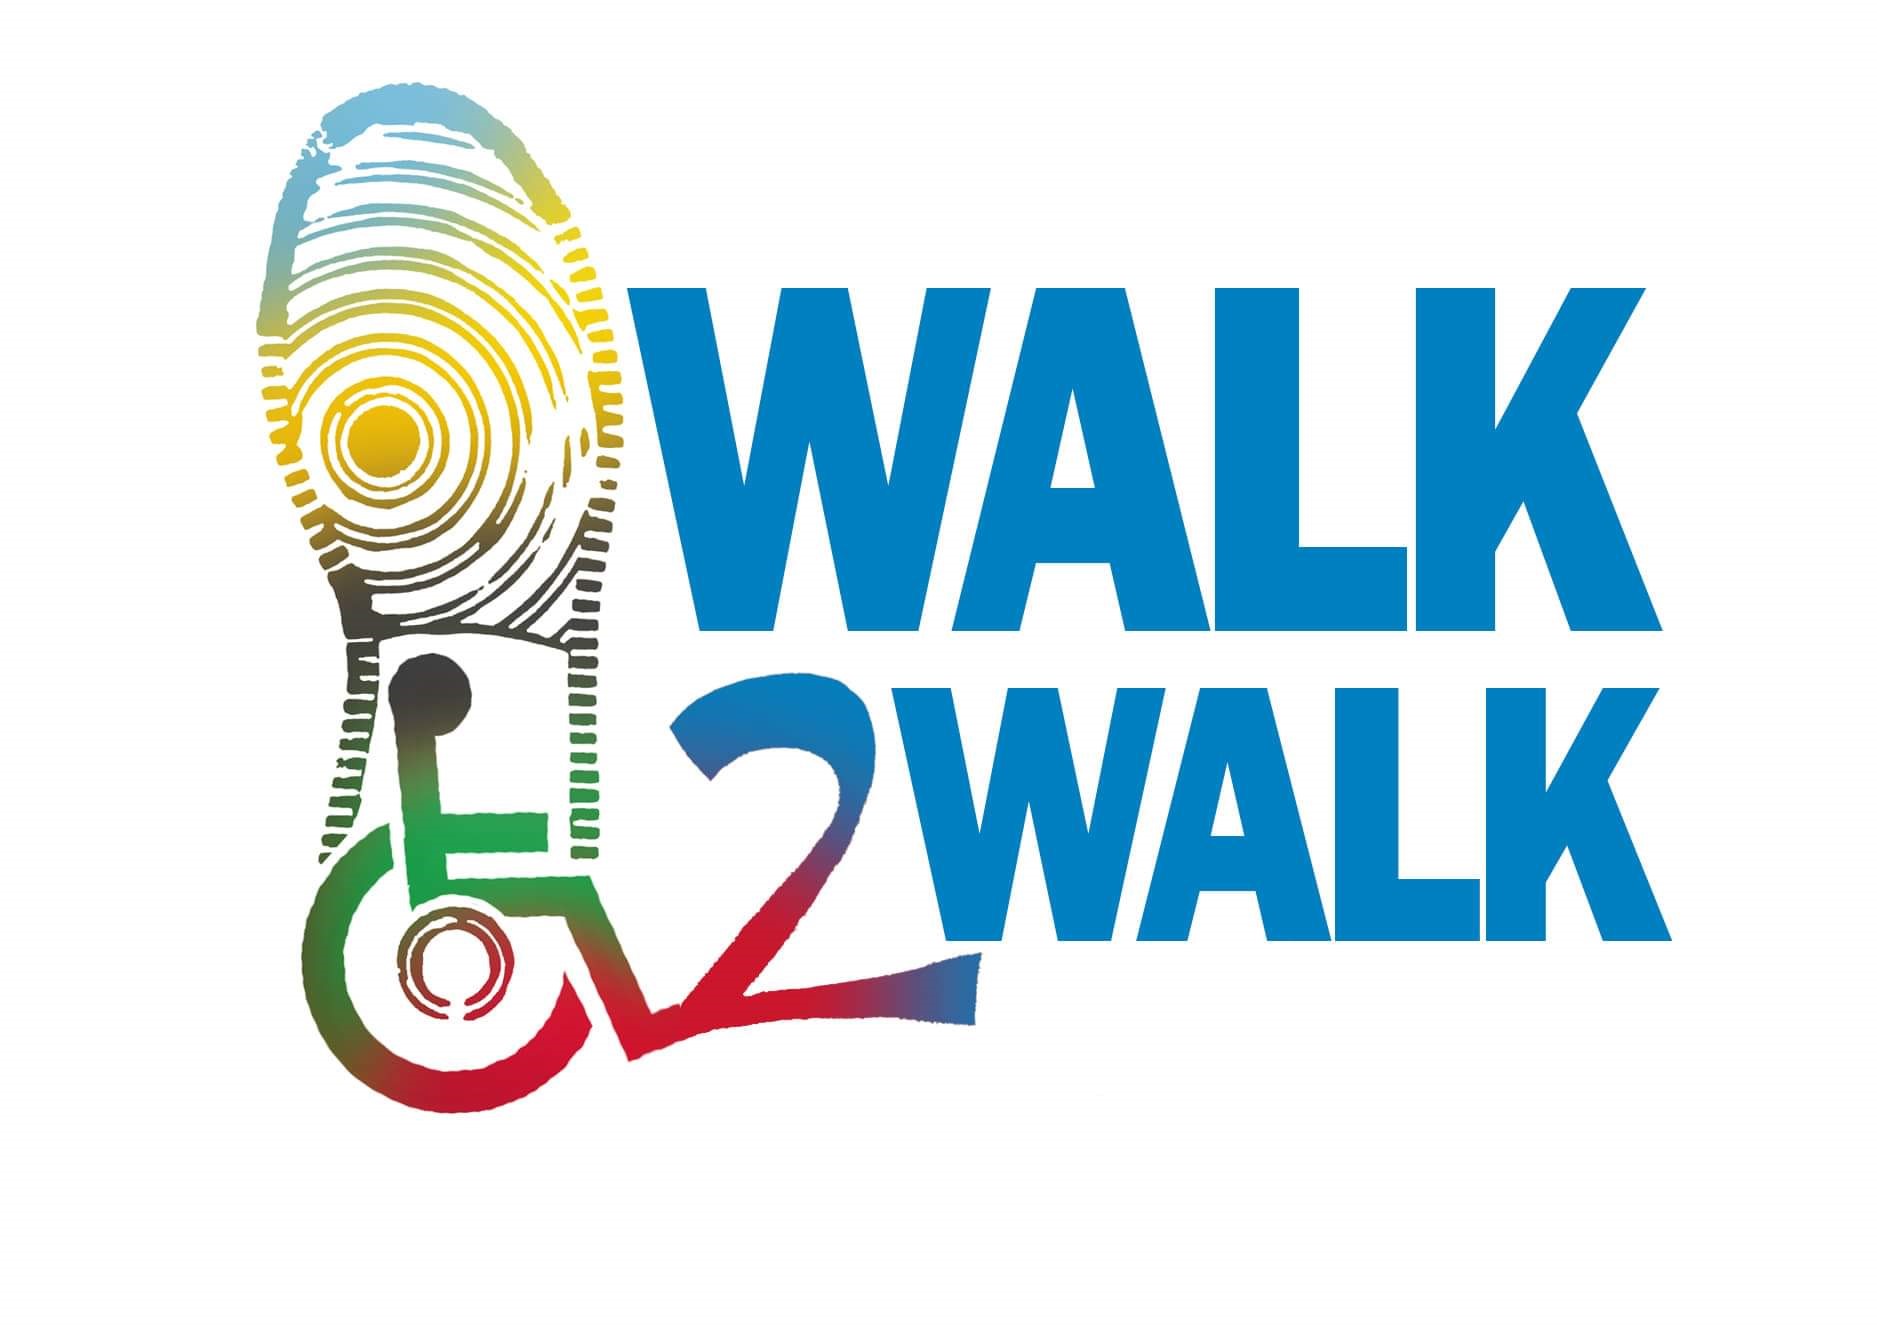 Walk2Walk multicolor logo with a shoe print with universal wheelchair symbol inside and works walk 2 walk